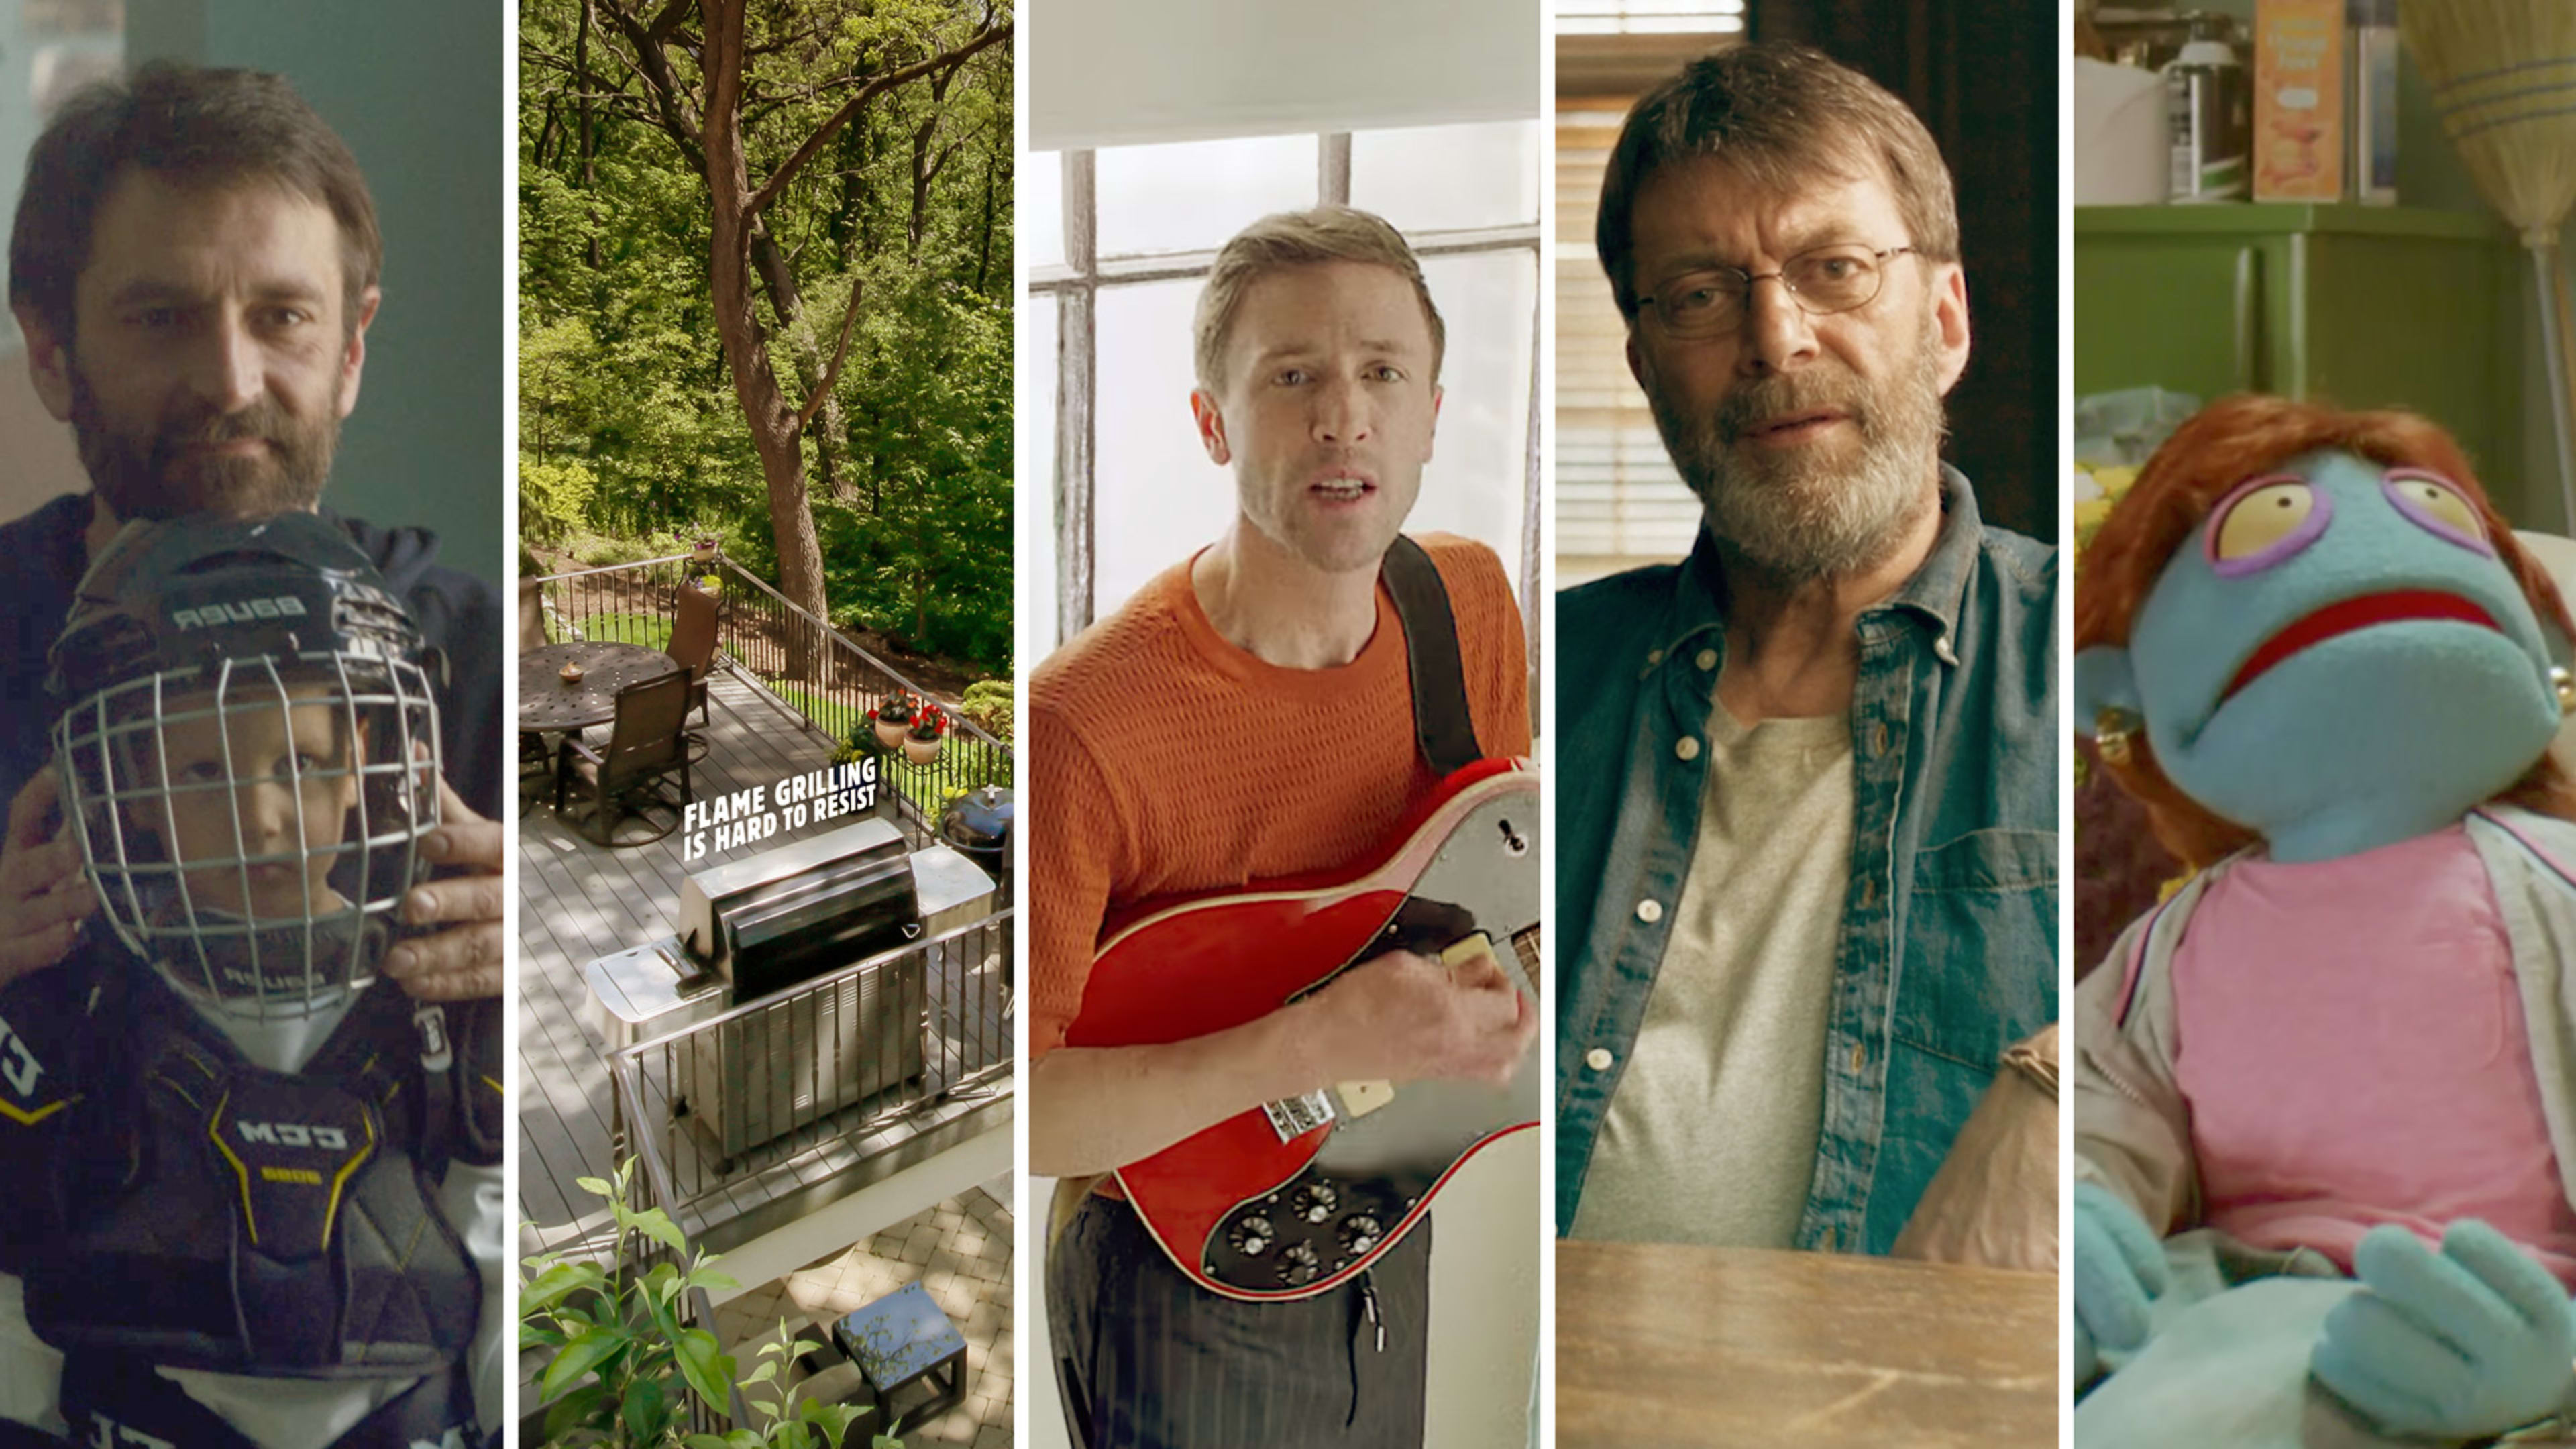 Top 5 Ads Of The Week: Burger King’s McMansions, Ikea’s Music Vid